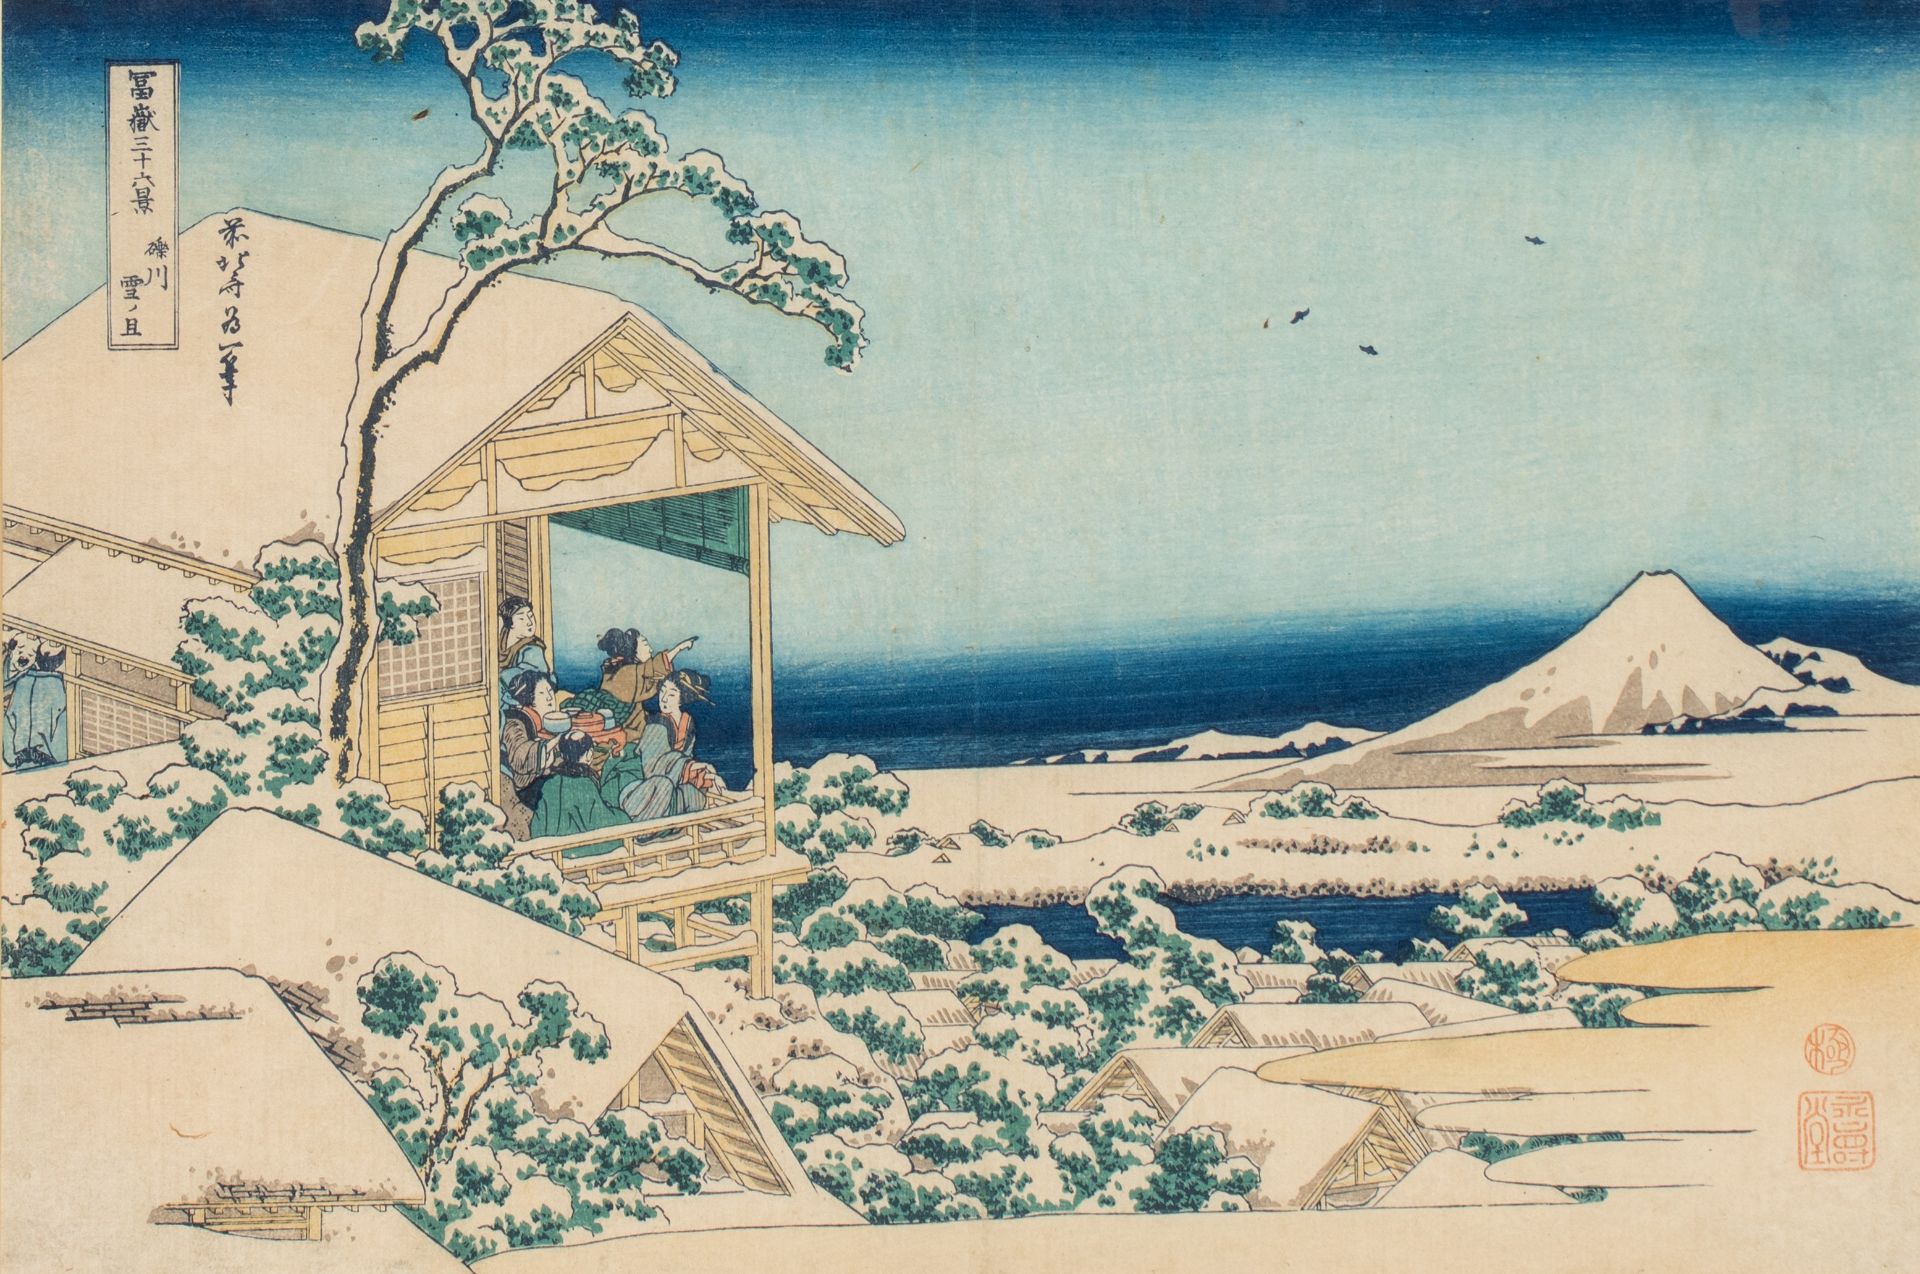 A Japanese woodblock print by Hokusai, from the series "36 views on Mount Fuji", no. 24 morning snow